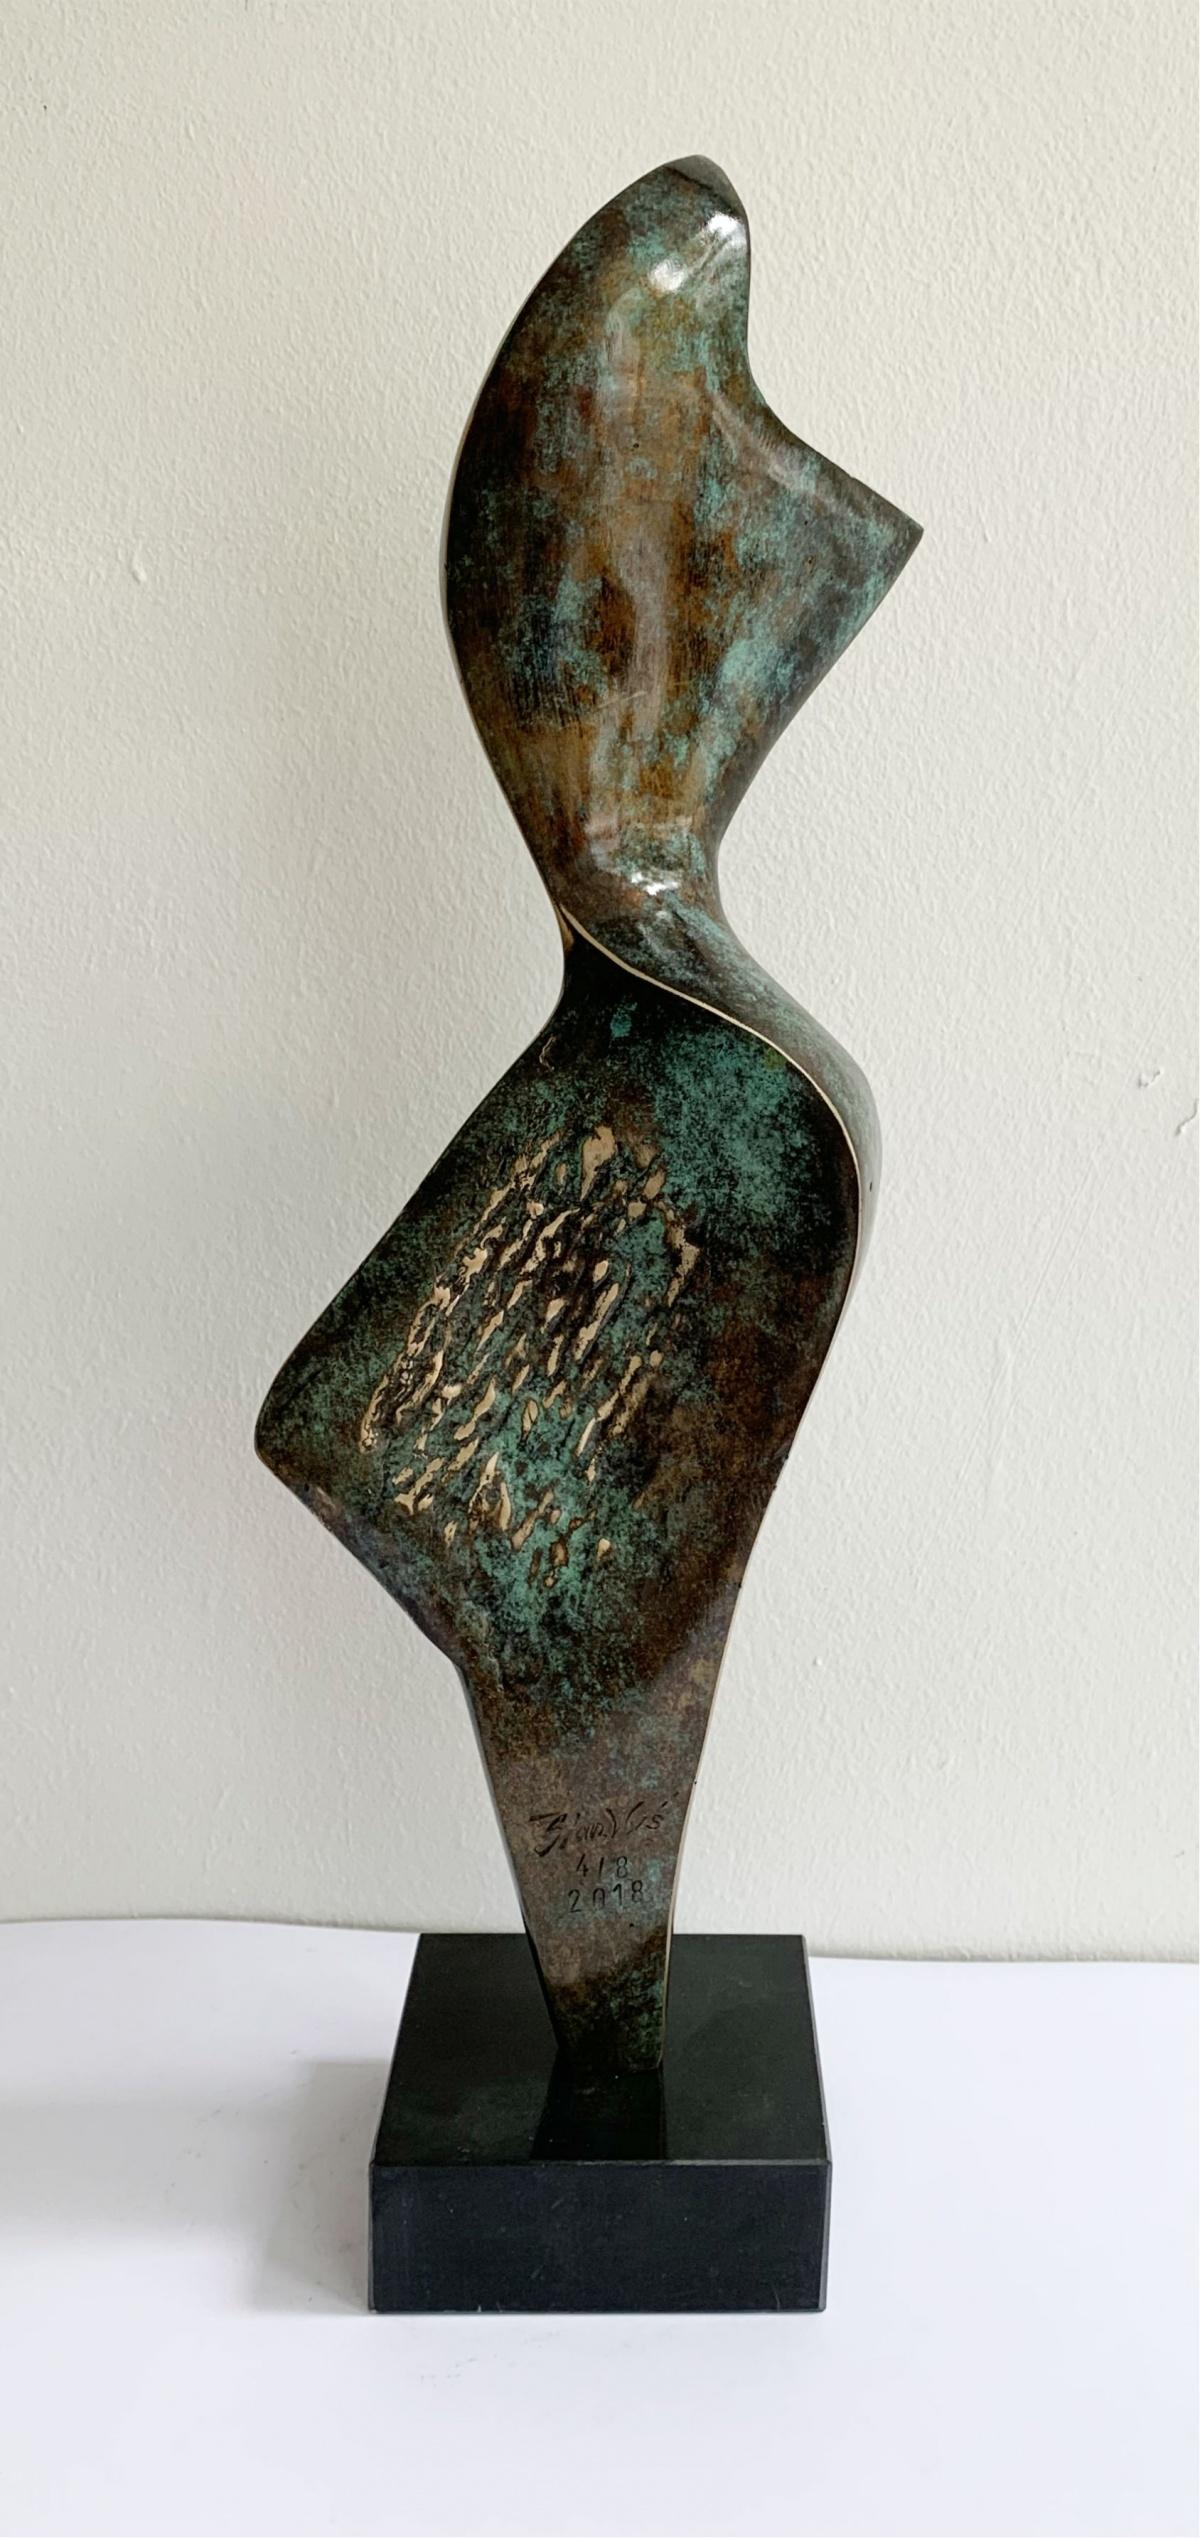 Copy 4 of 8
Dimesnions of sculpture including base

STANISŁAW  WYSOCKI (b. 1949)
Wysocki studied at the Academy of Fine Arts in Poznań (1978-1980) and then at the Hochschule der Kunste in Berlin under prof. J.H. Lonas. He received his diploma in